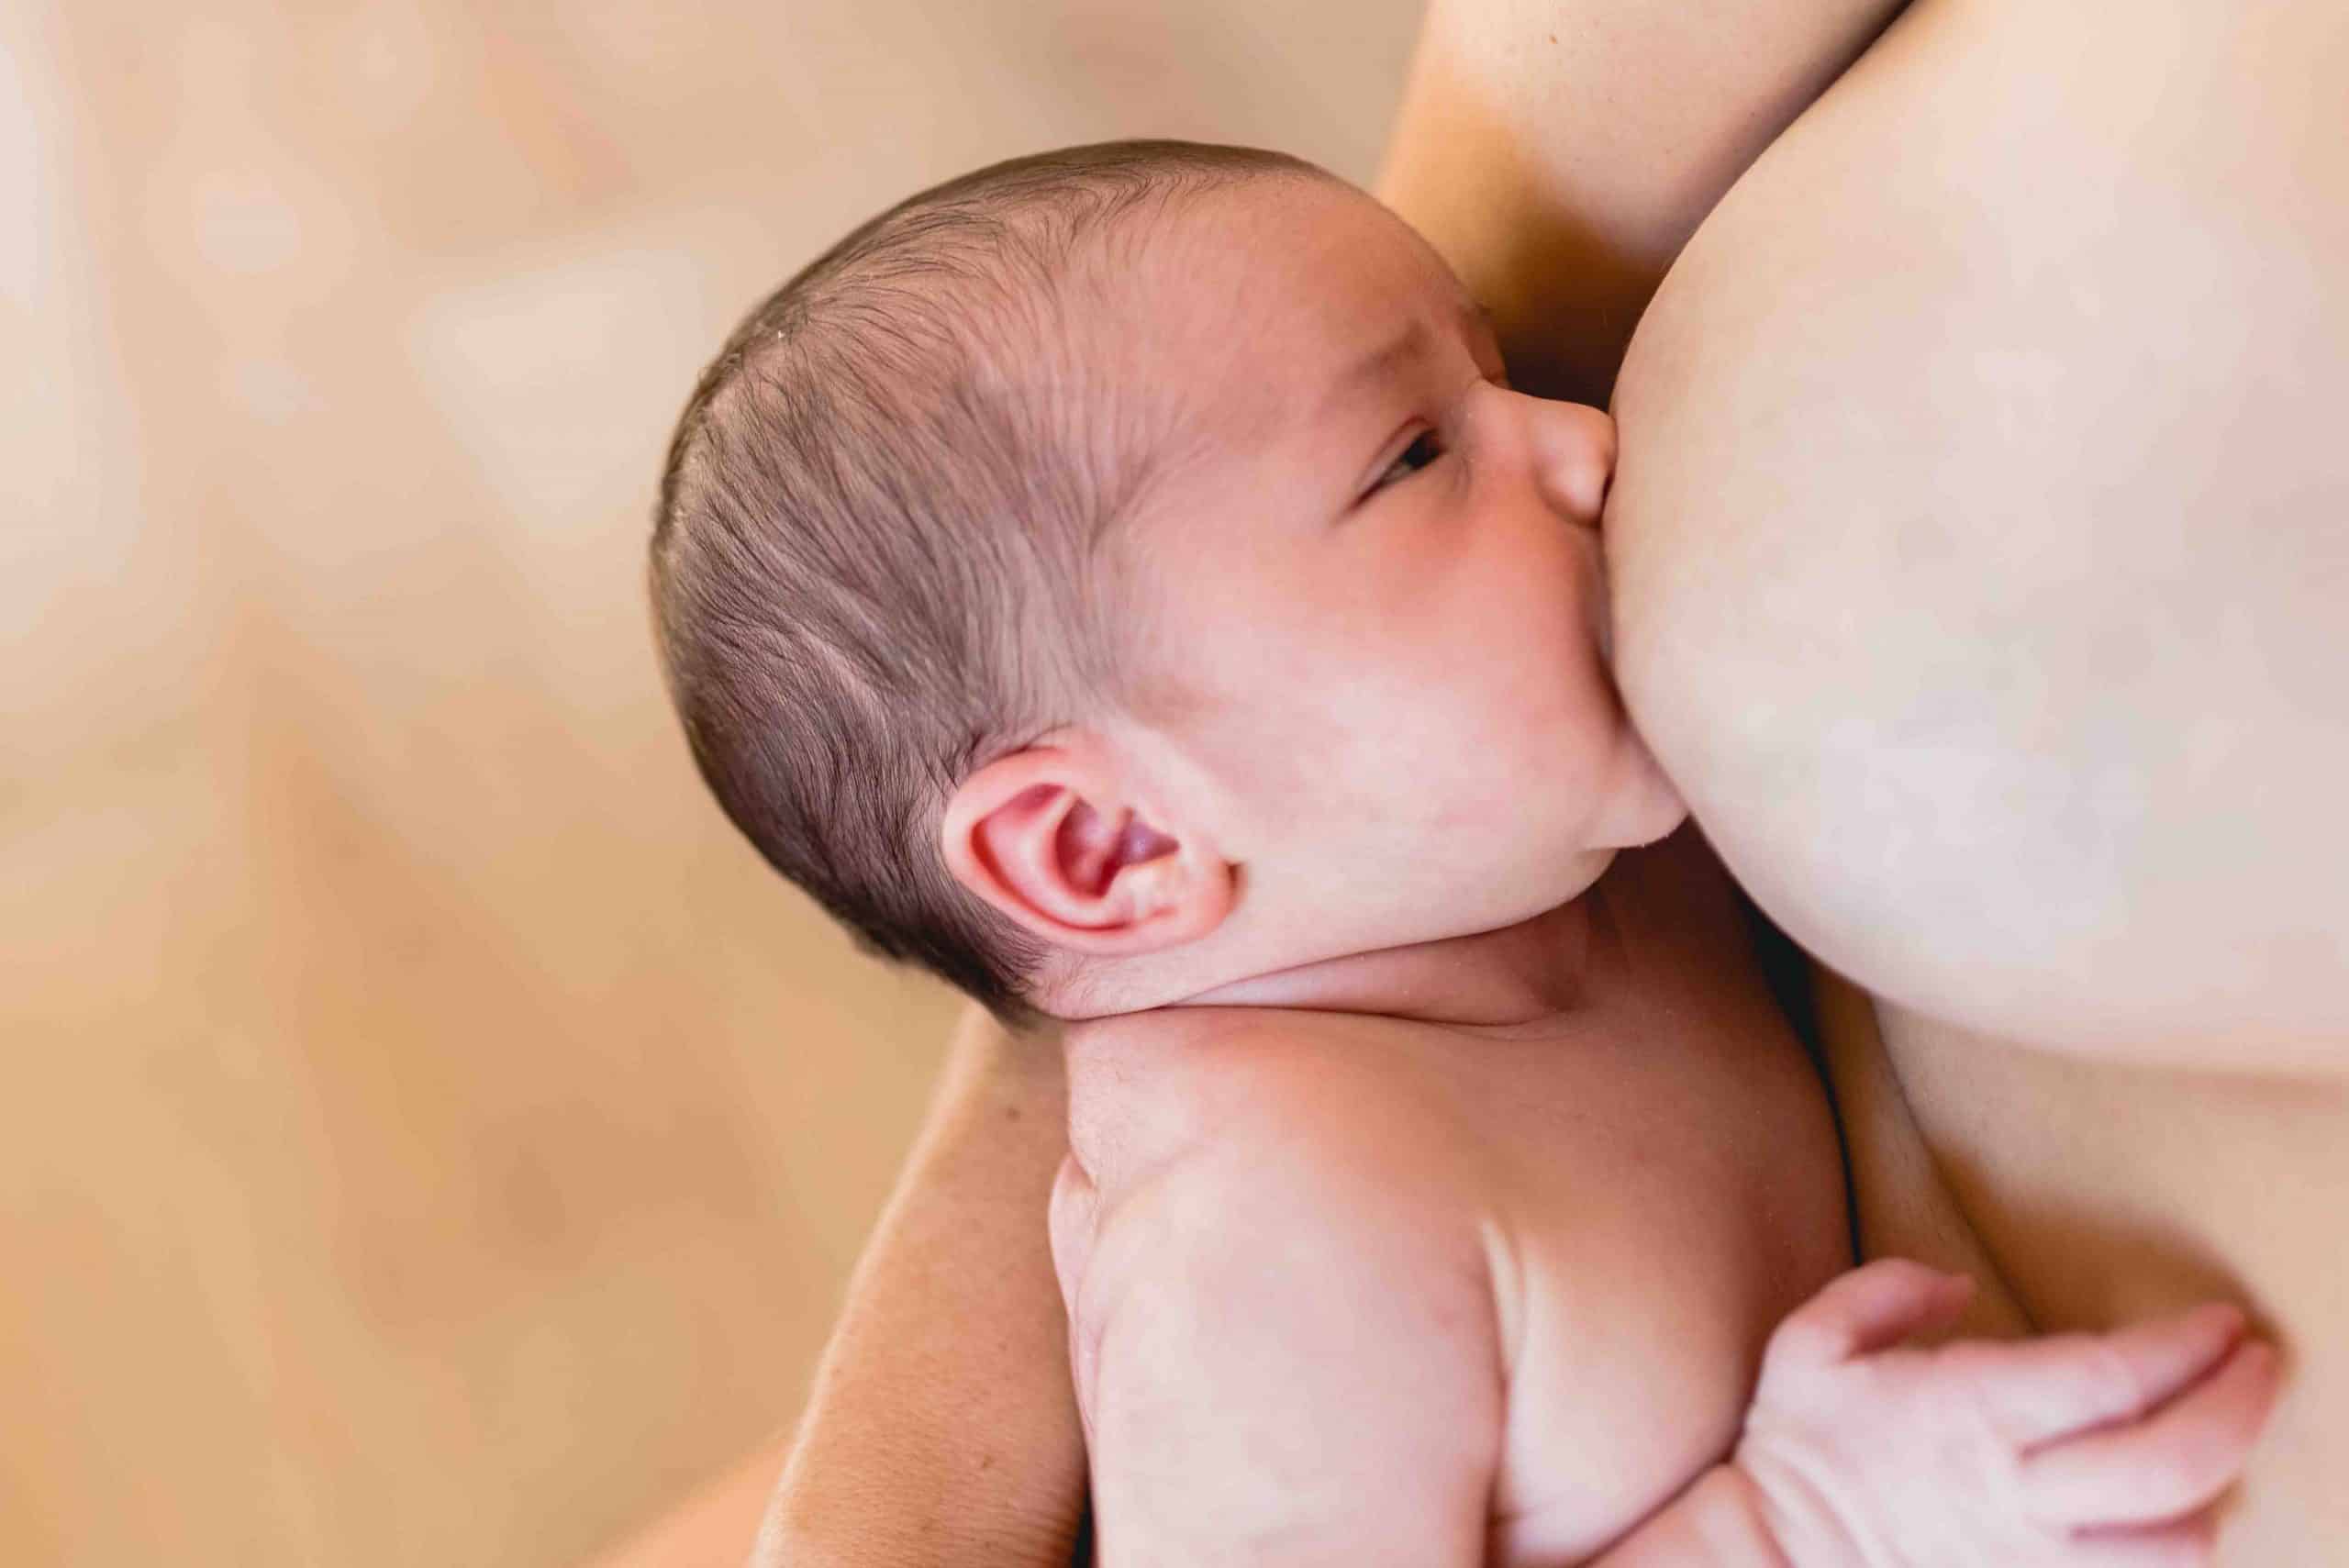 The Breastfeeding Protocol: A Guide on How to be Ready